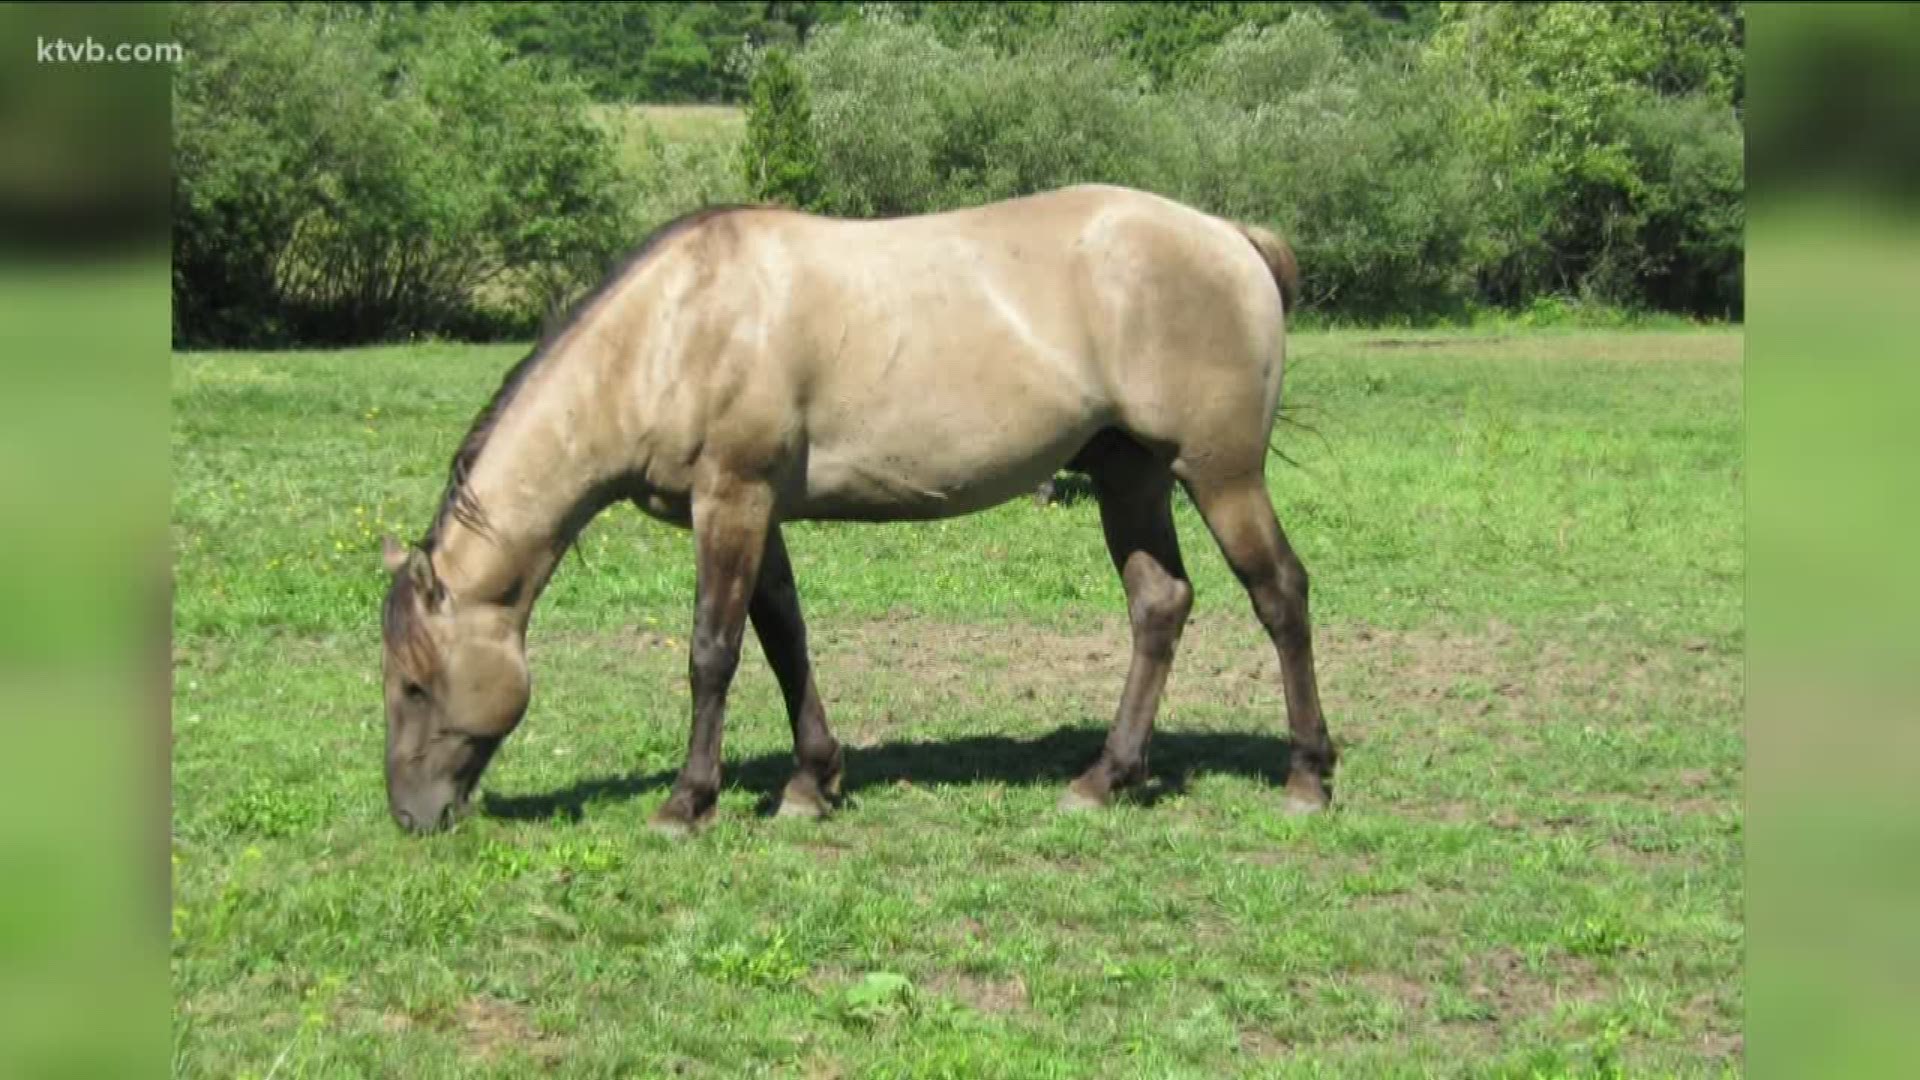 The family is devastated that someone killed their horse named Jazz. They've had him for 16 years.